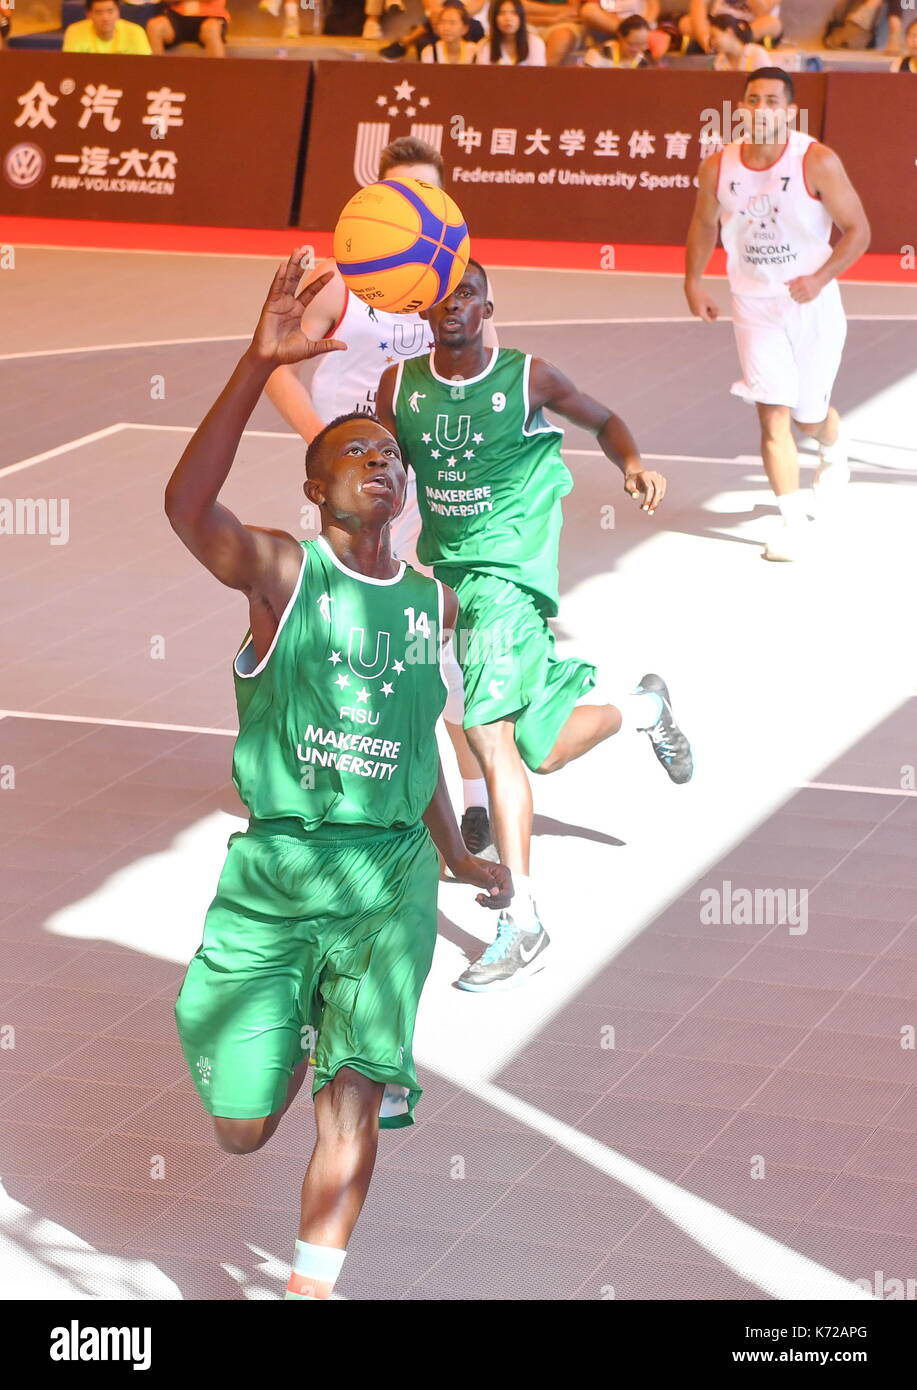 Xiamen, China's Fujian Province. 14th Sep, 2017. Awill Bazil (front) from Makerere University of Uganda goes to the basket during the 3X3 FISU World University League-2017 Finals between Lincoln University of New Zealand and Makerere University of Uganda, in Xiamen, southeast China's Fujian Province, Sept. 14, 2017. Credit: Lin Shanchuan/Xinhua/Alamy Live News Stock Photo